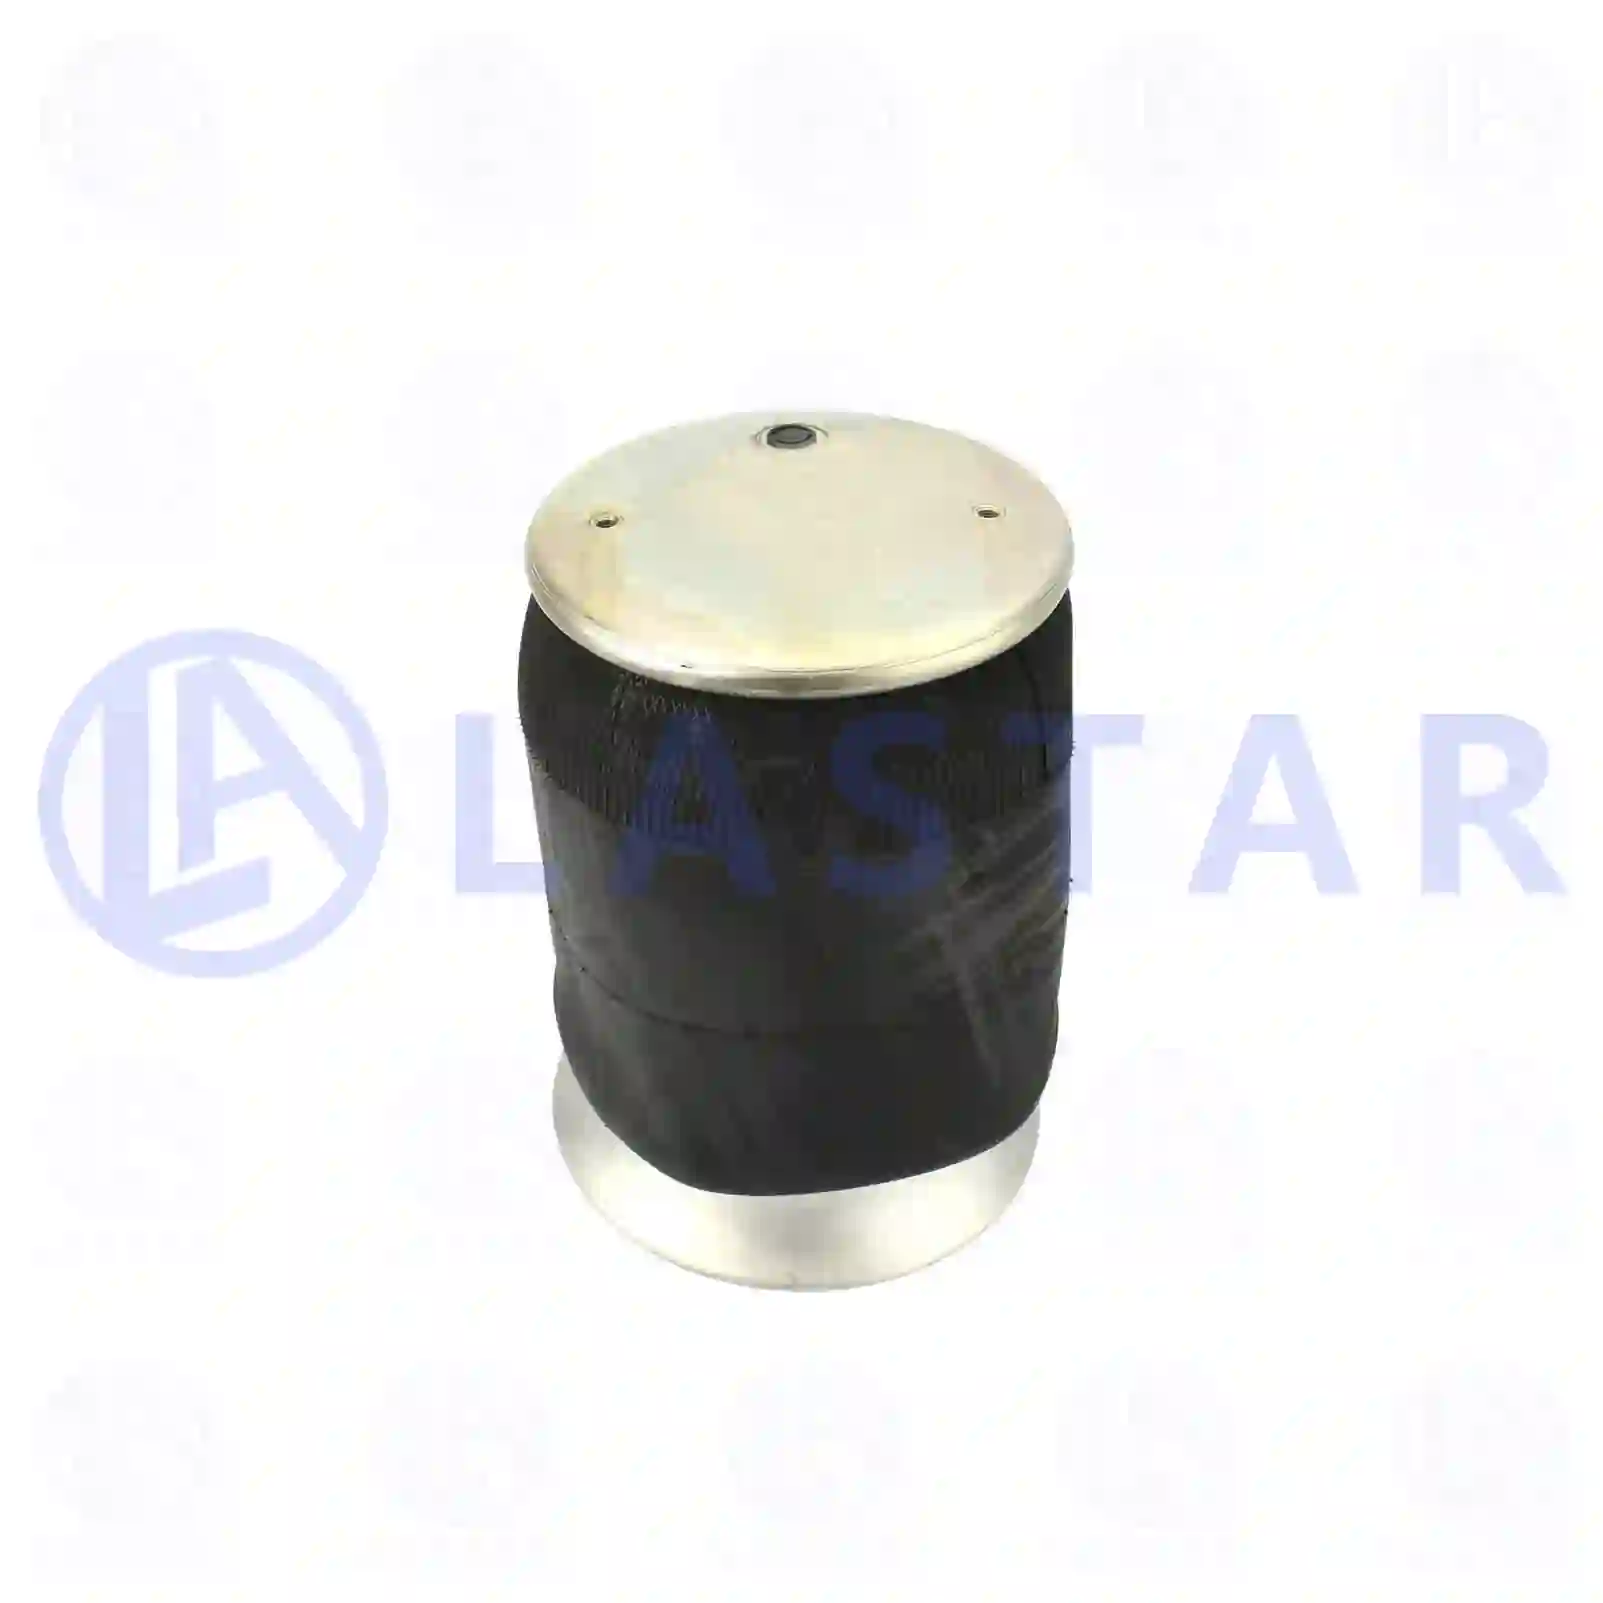 Air spring, with steel piston, 77727184, MLF7132, 1314905, 1865753, 255294, 345879 ||  77727184 Lastar Spare Part | Truck Spare Parts, Auotomotive Spare Parts Air spring, with steel piston, 77727184, MLF7132, 1314905, 1865753, 255294, 345879 ||  77727184 Lastar Spare Part | Truck Spare Parts, Auotomotive Spare Parts